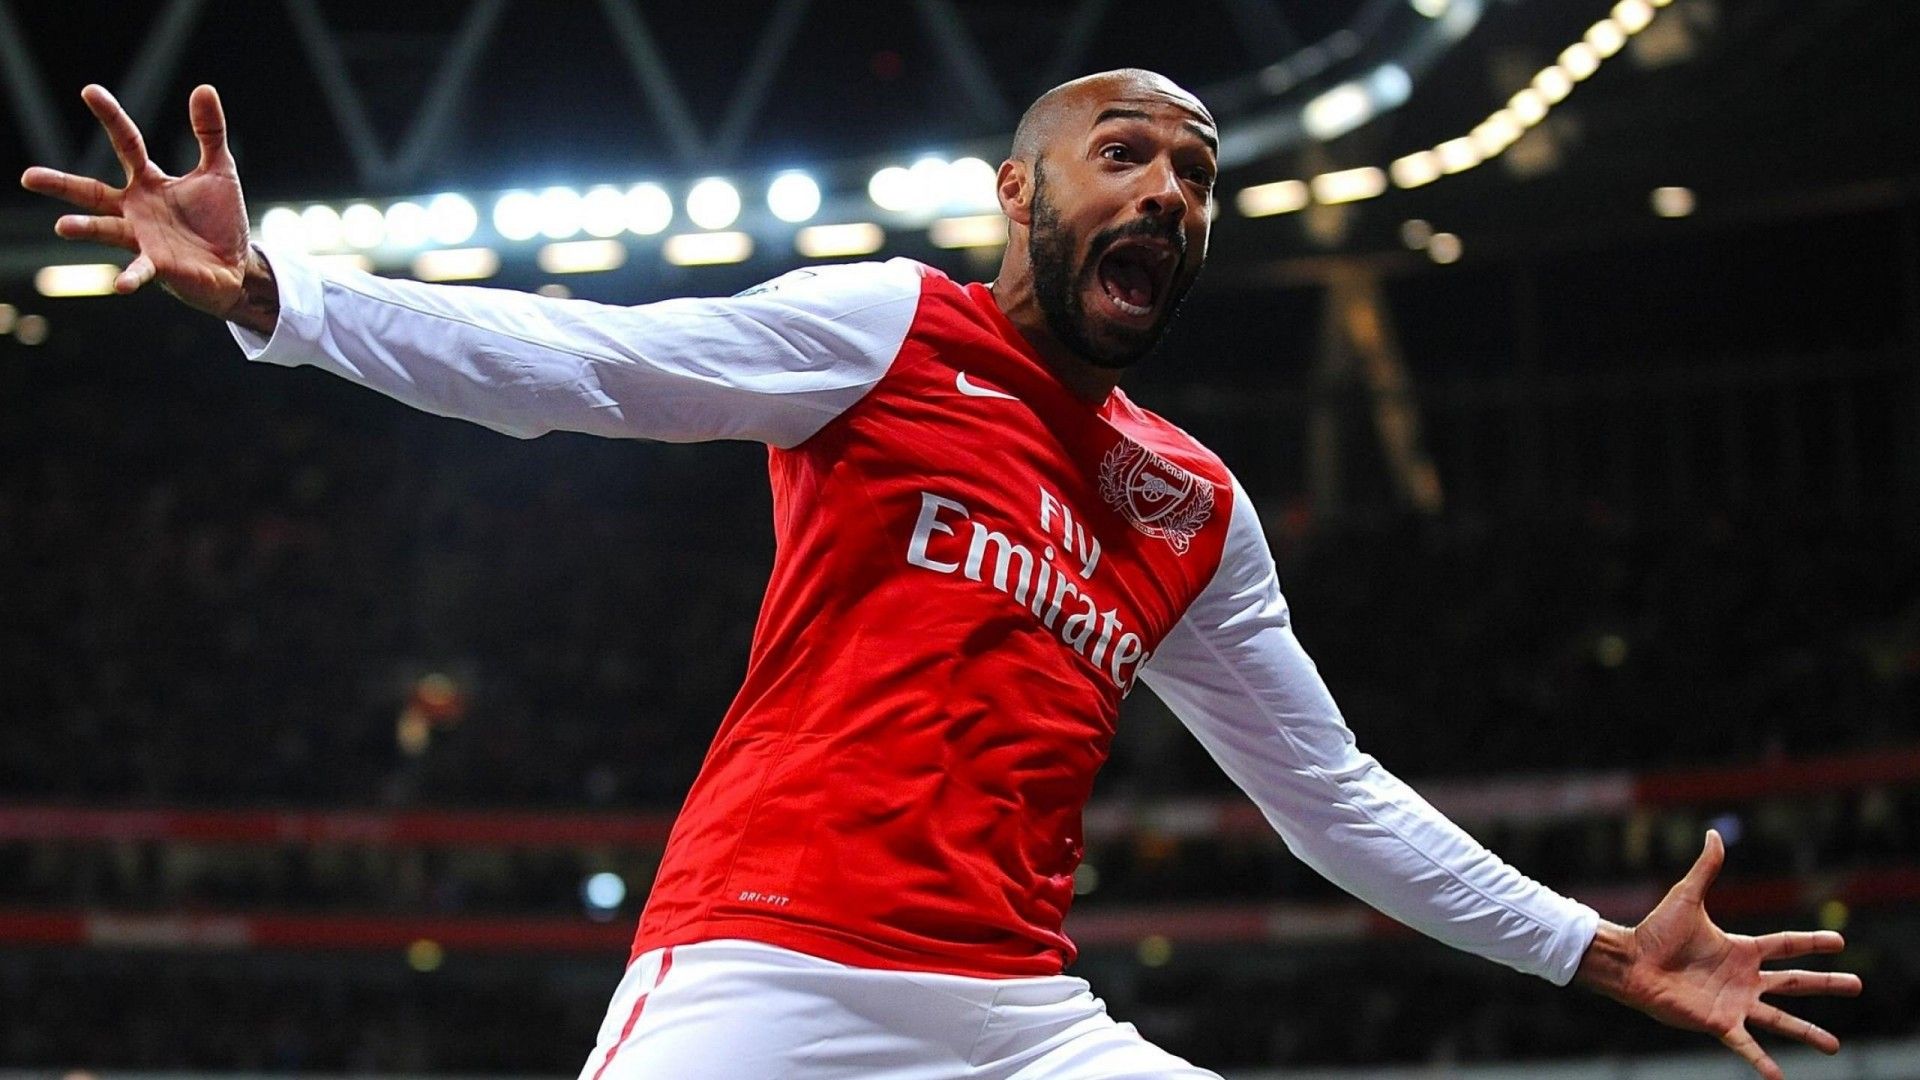 Thierry Henry Arsenal Arsenal Thierry Henry Legends (id: 182676 ...